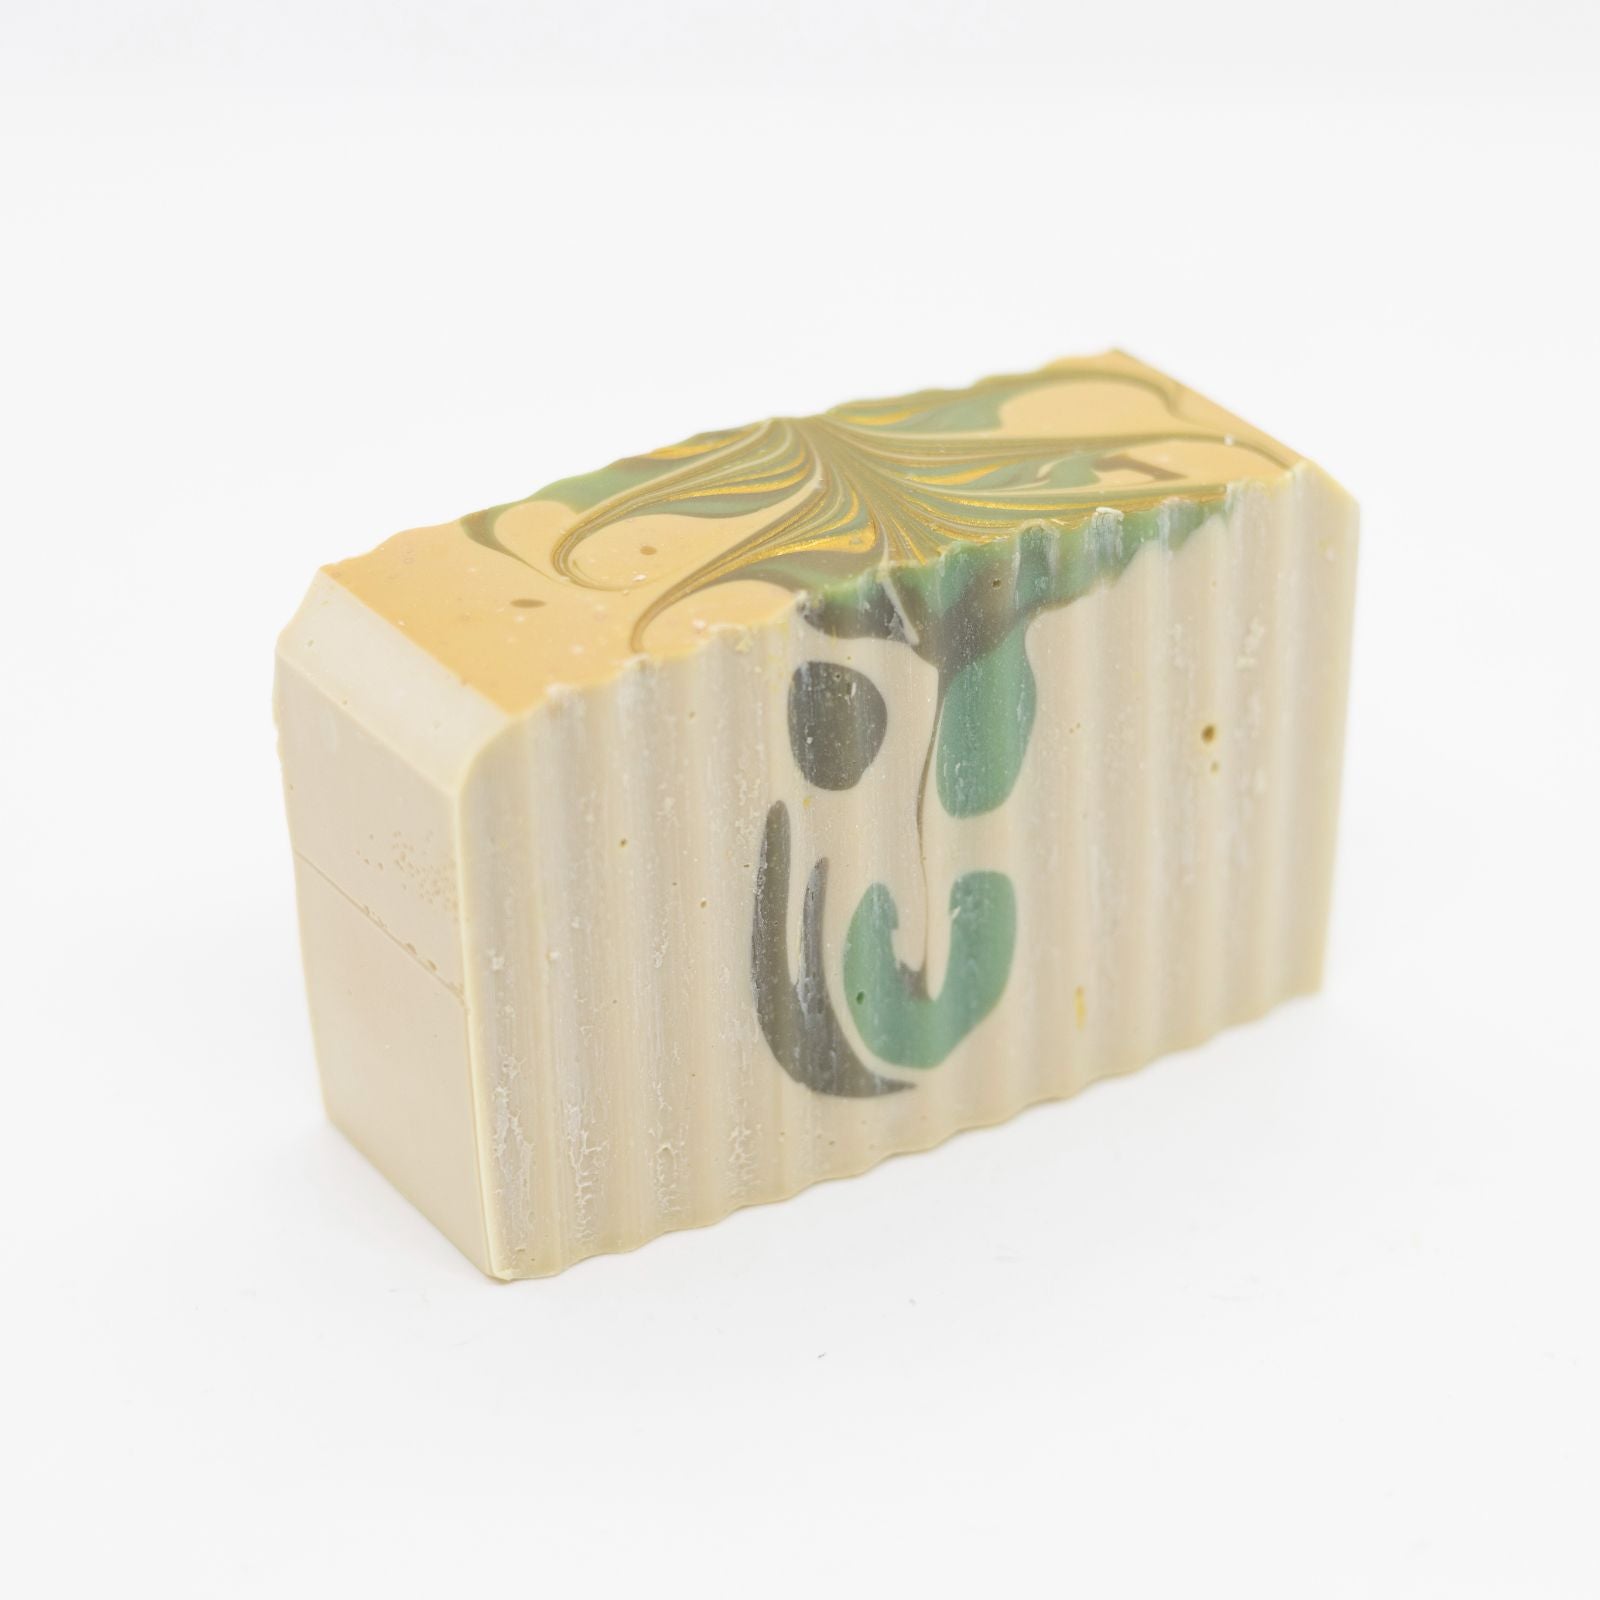 Commando Shea Butter Soap Bar with tan, green, and yellow design